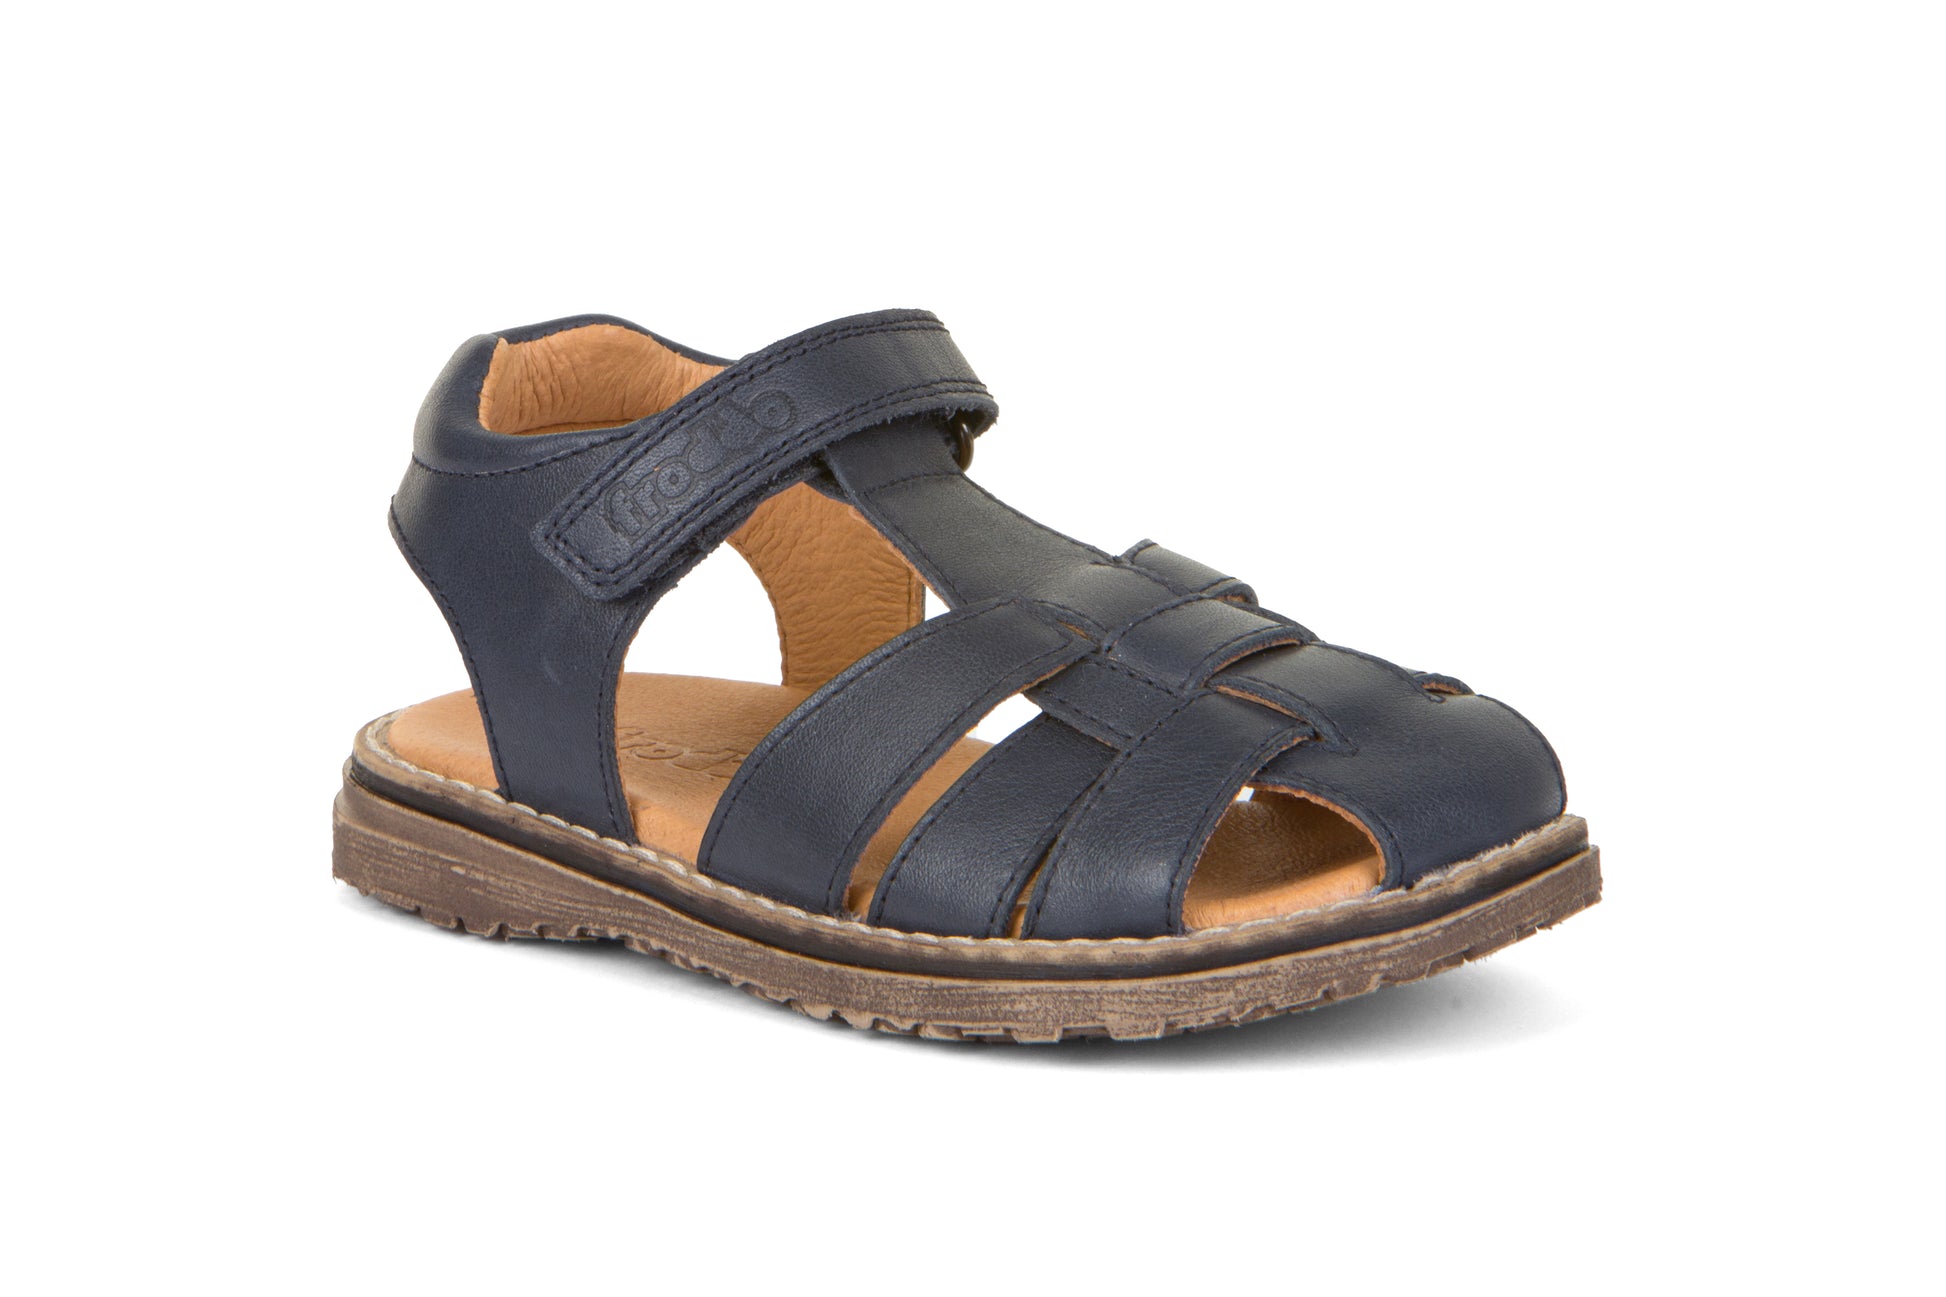 A boys sandal by Froddo, style G31500233 Daros, in navy, velcro fastening. Angled view.